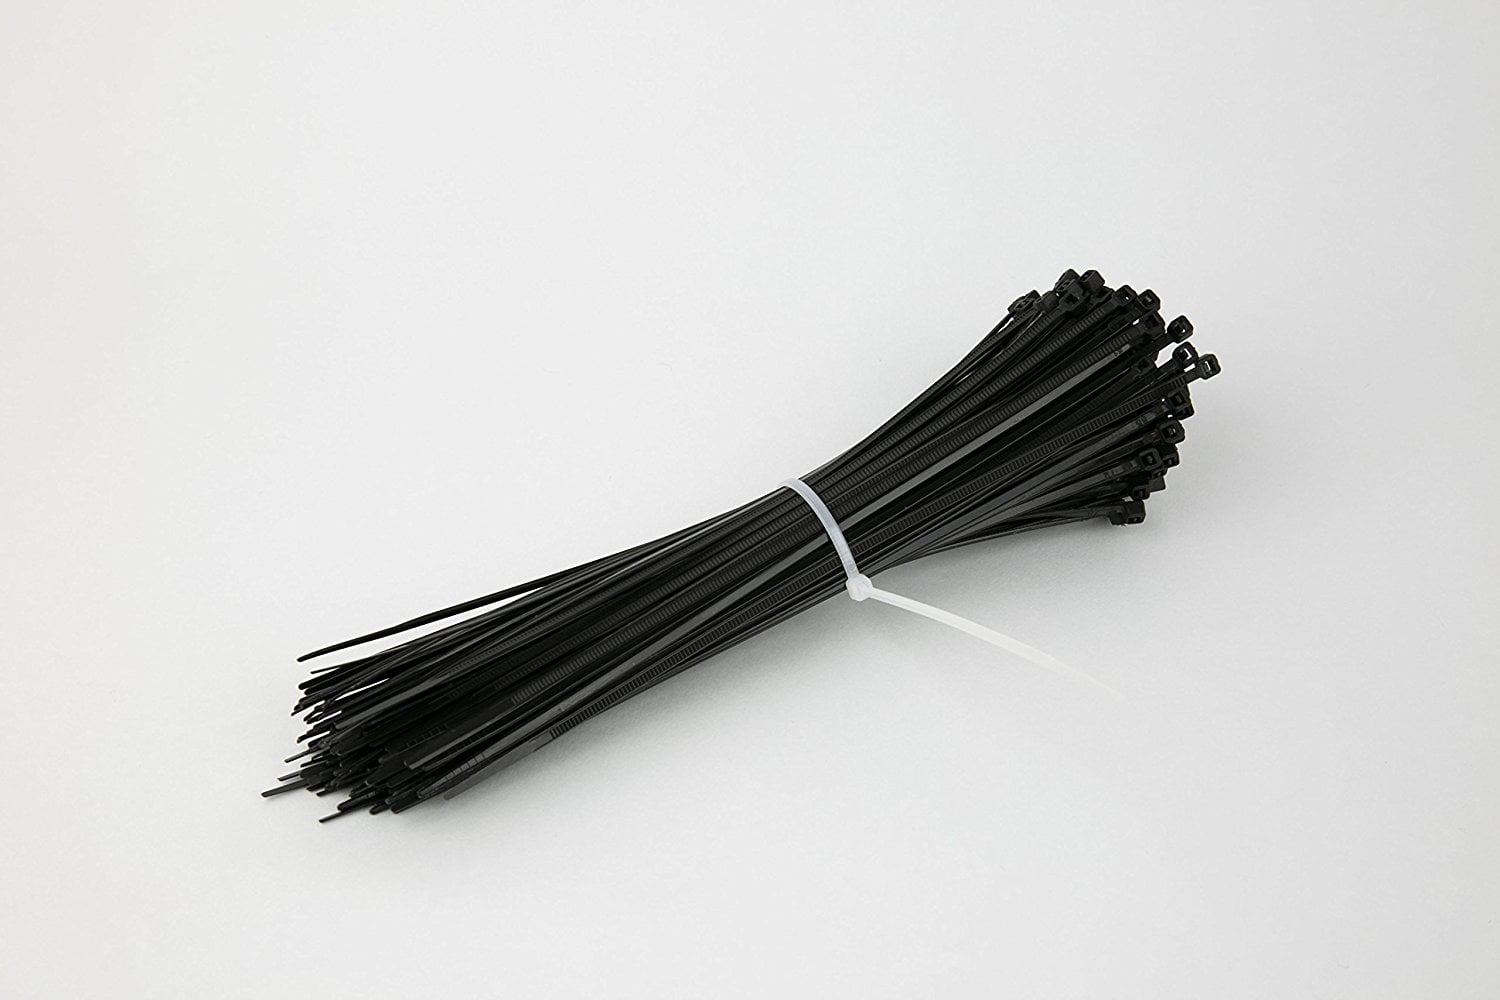 Details about   Tire up Cable Ties Locking Zip Wire Wrap Cord Lot Accessories 